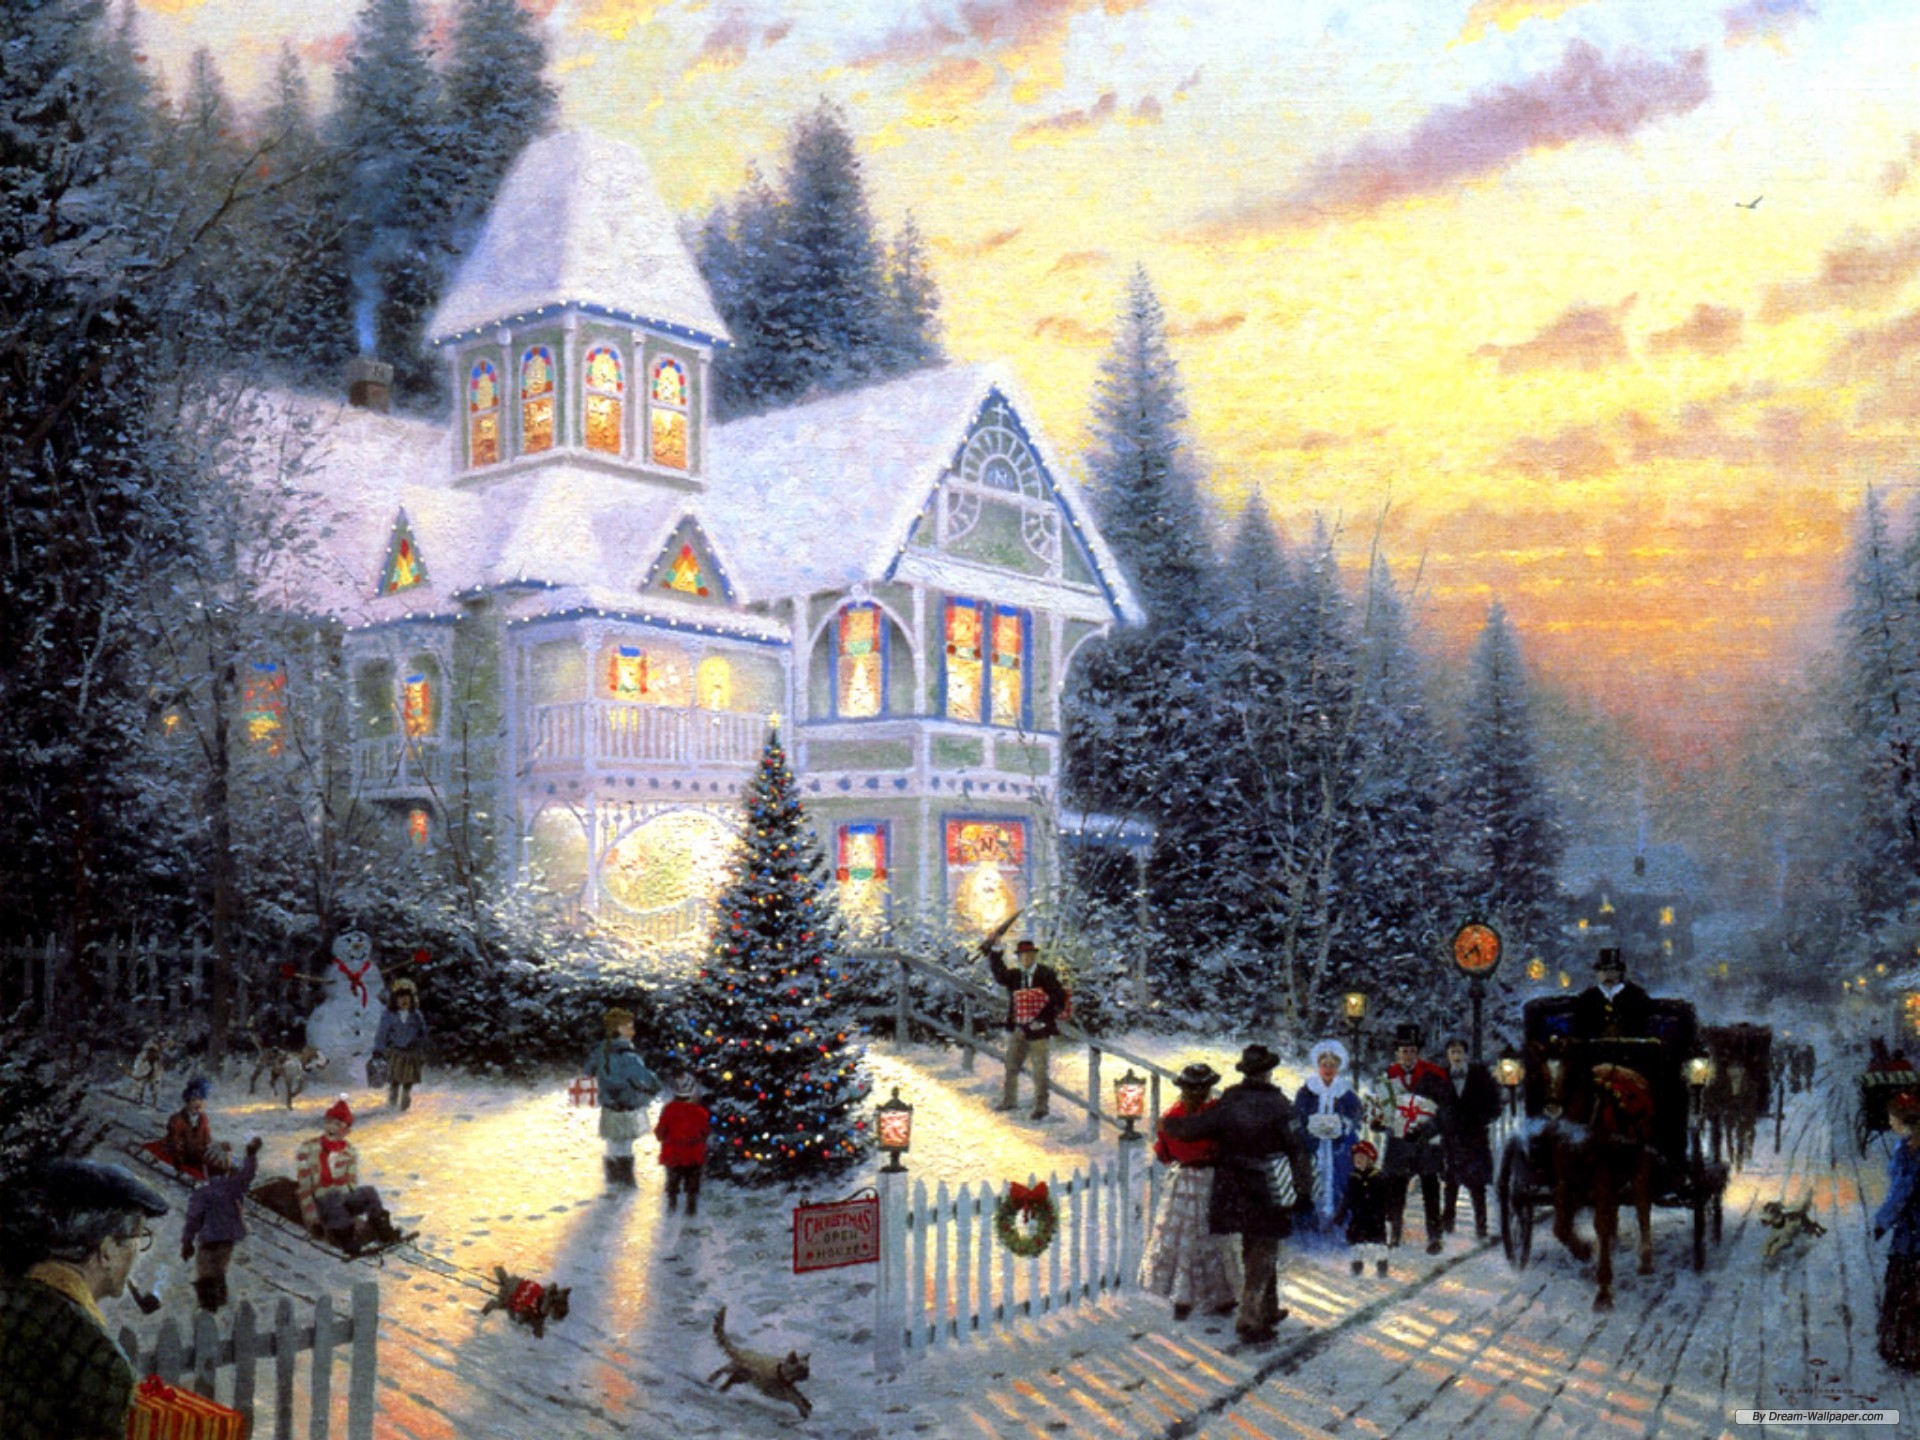  holiday wallpaperchristmas eve painting wallpaper1920x1440free